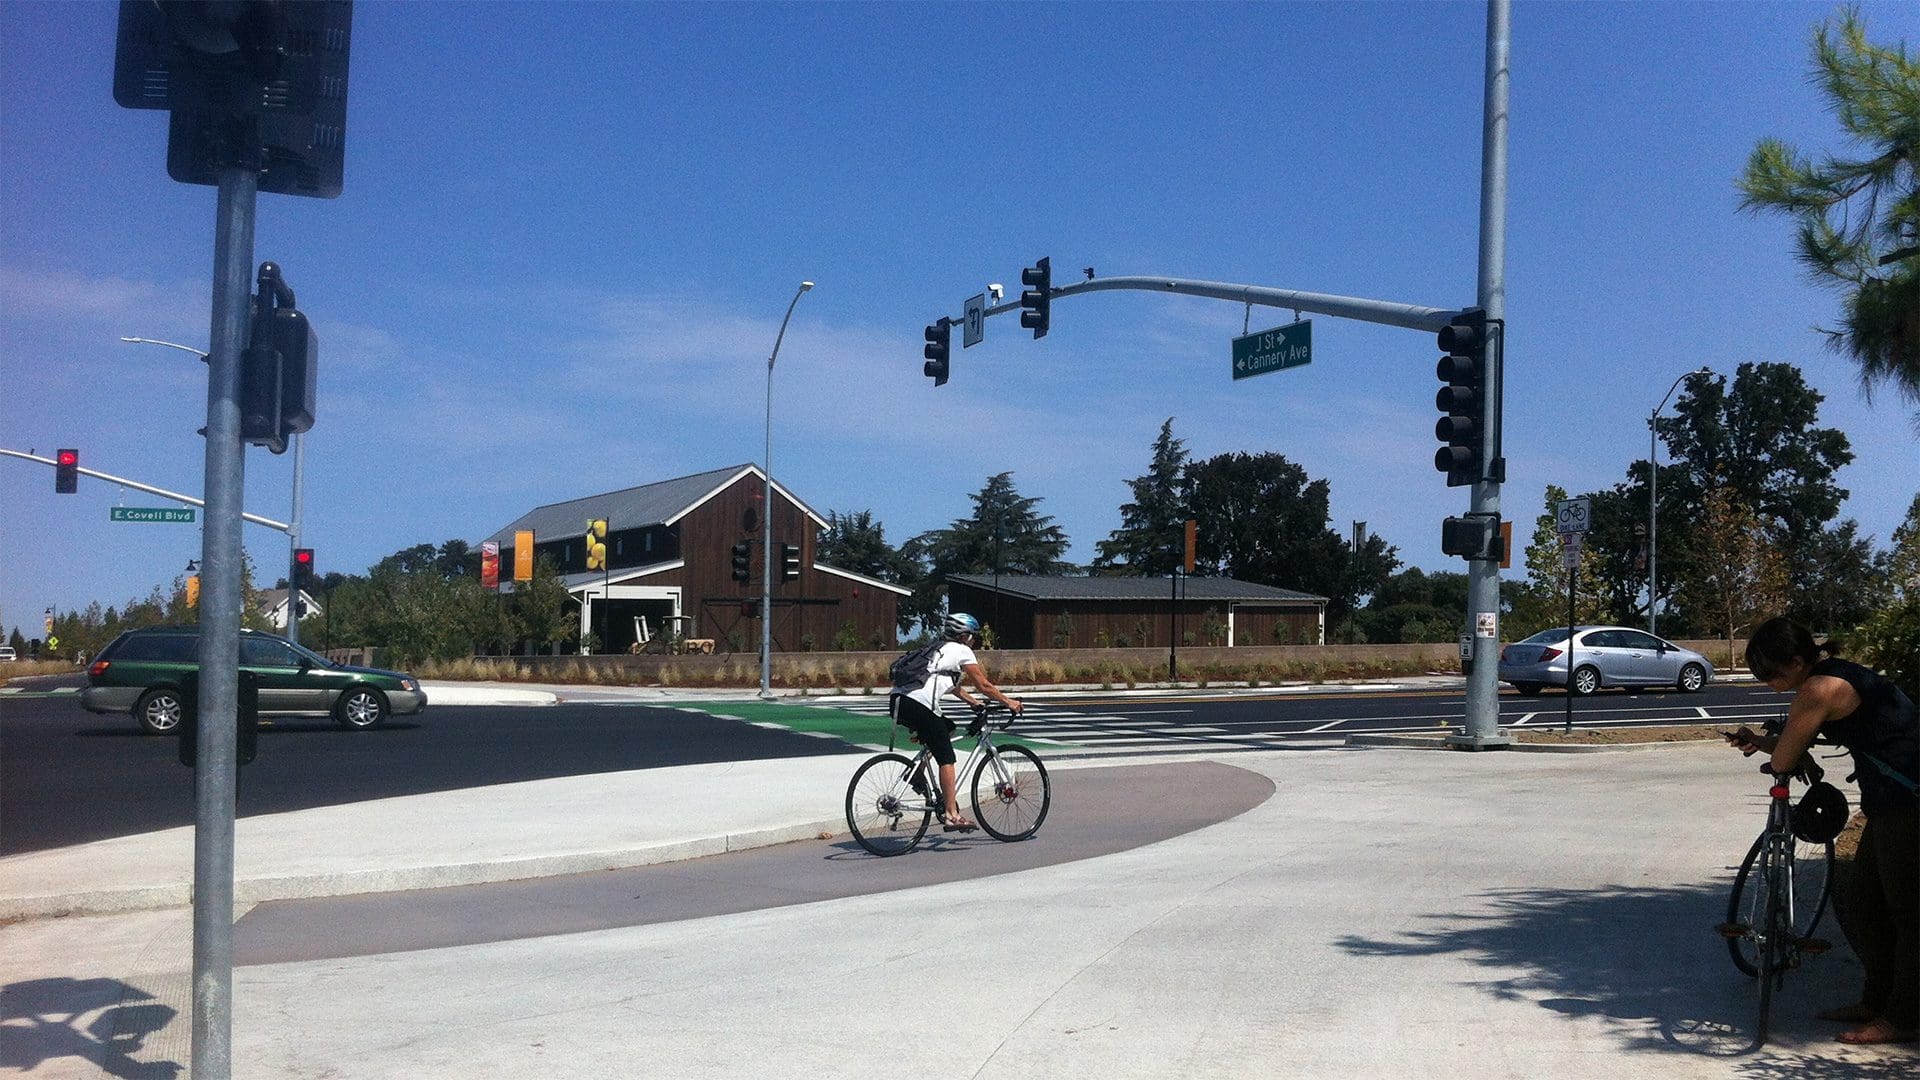 Bicyclist at a protected intersection